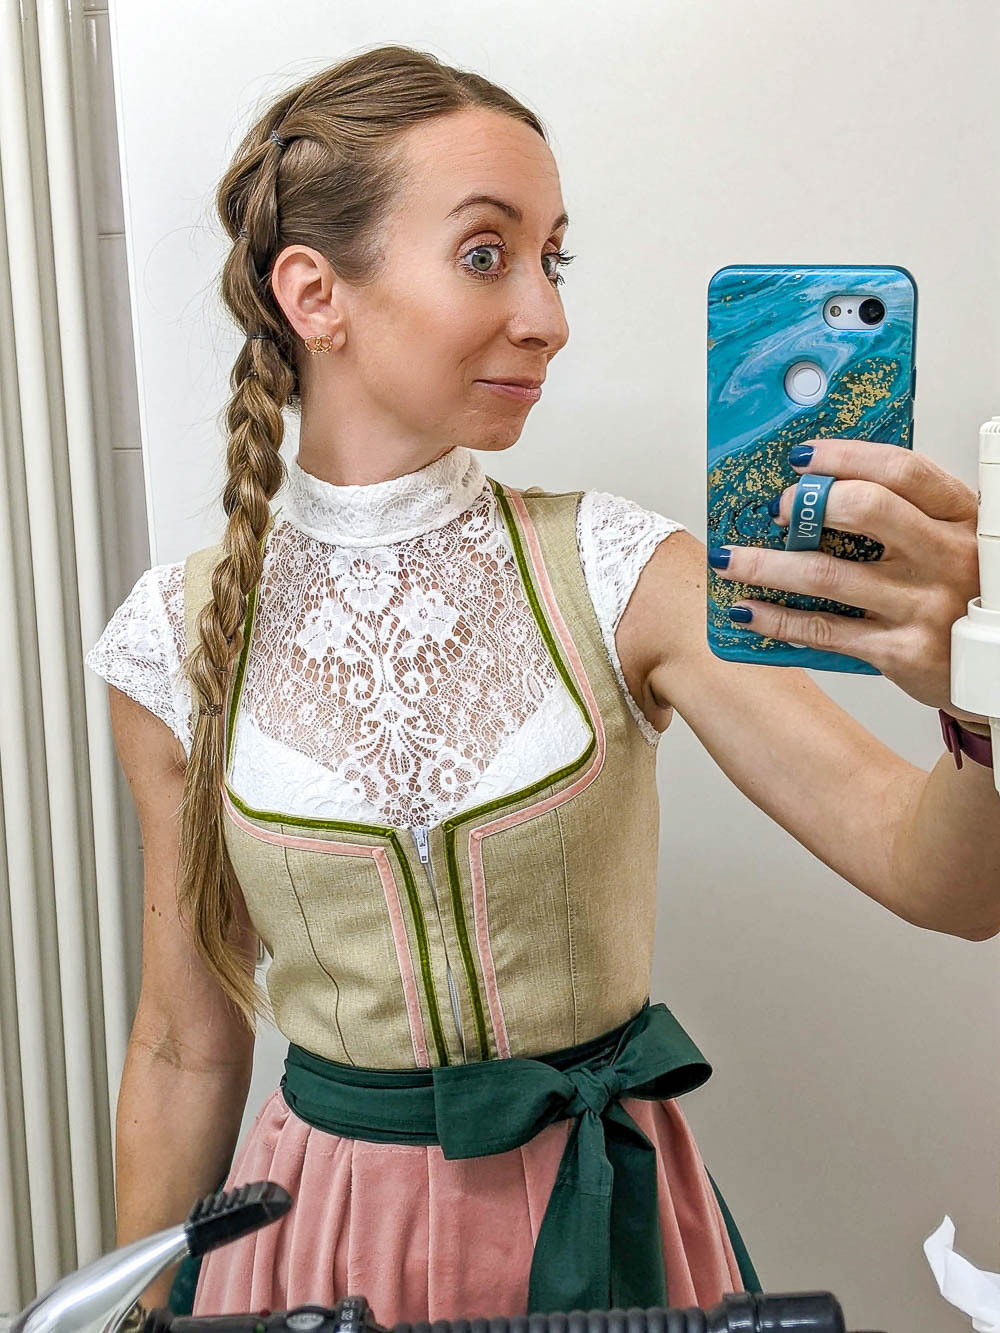 me in a tan dirndl and lace blouse taking a mirror selfie